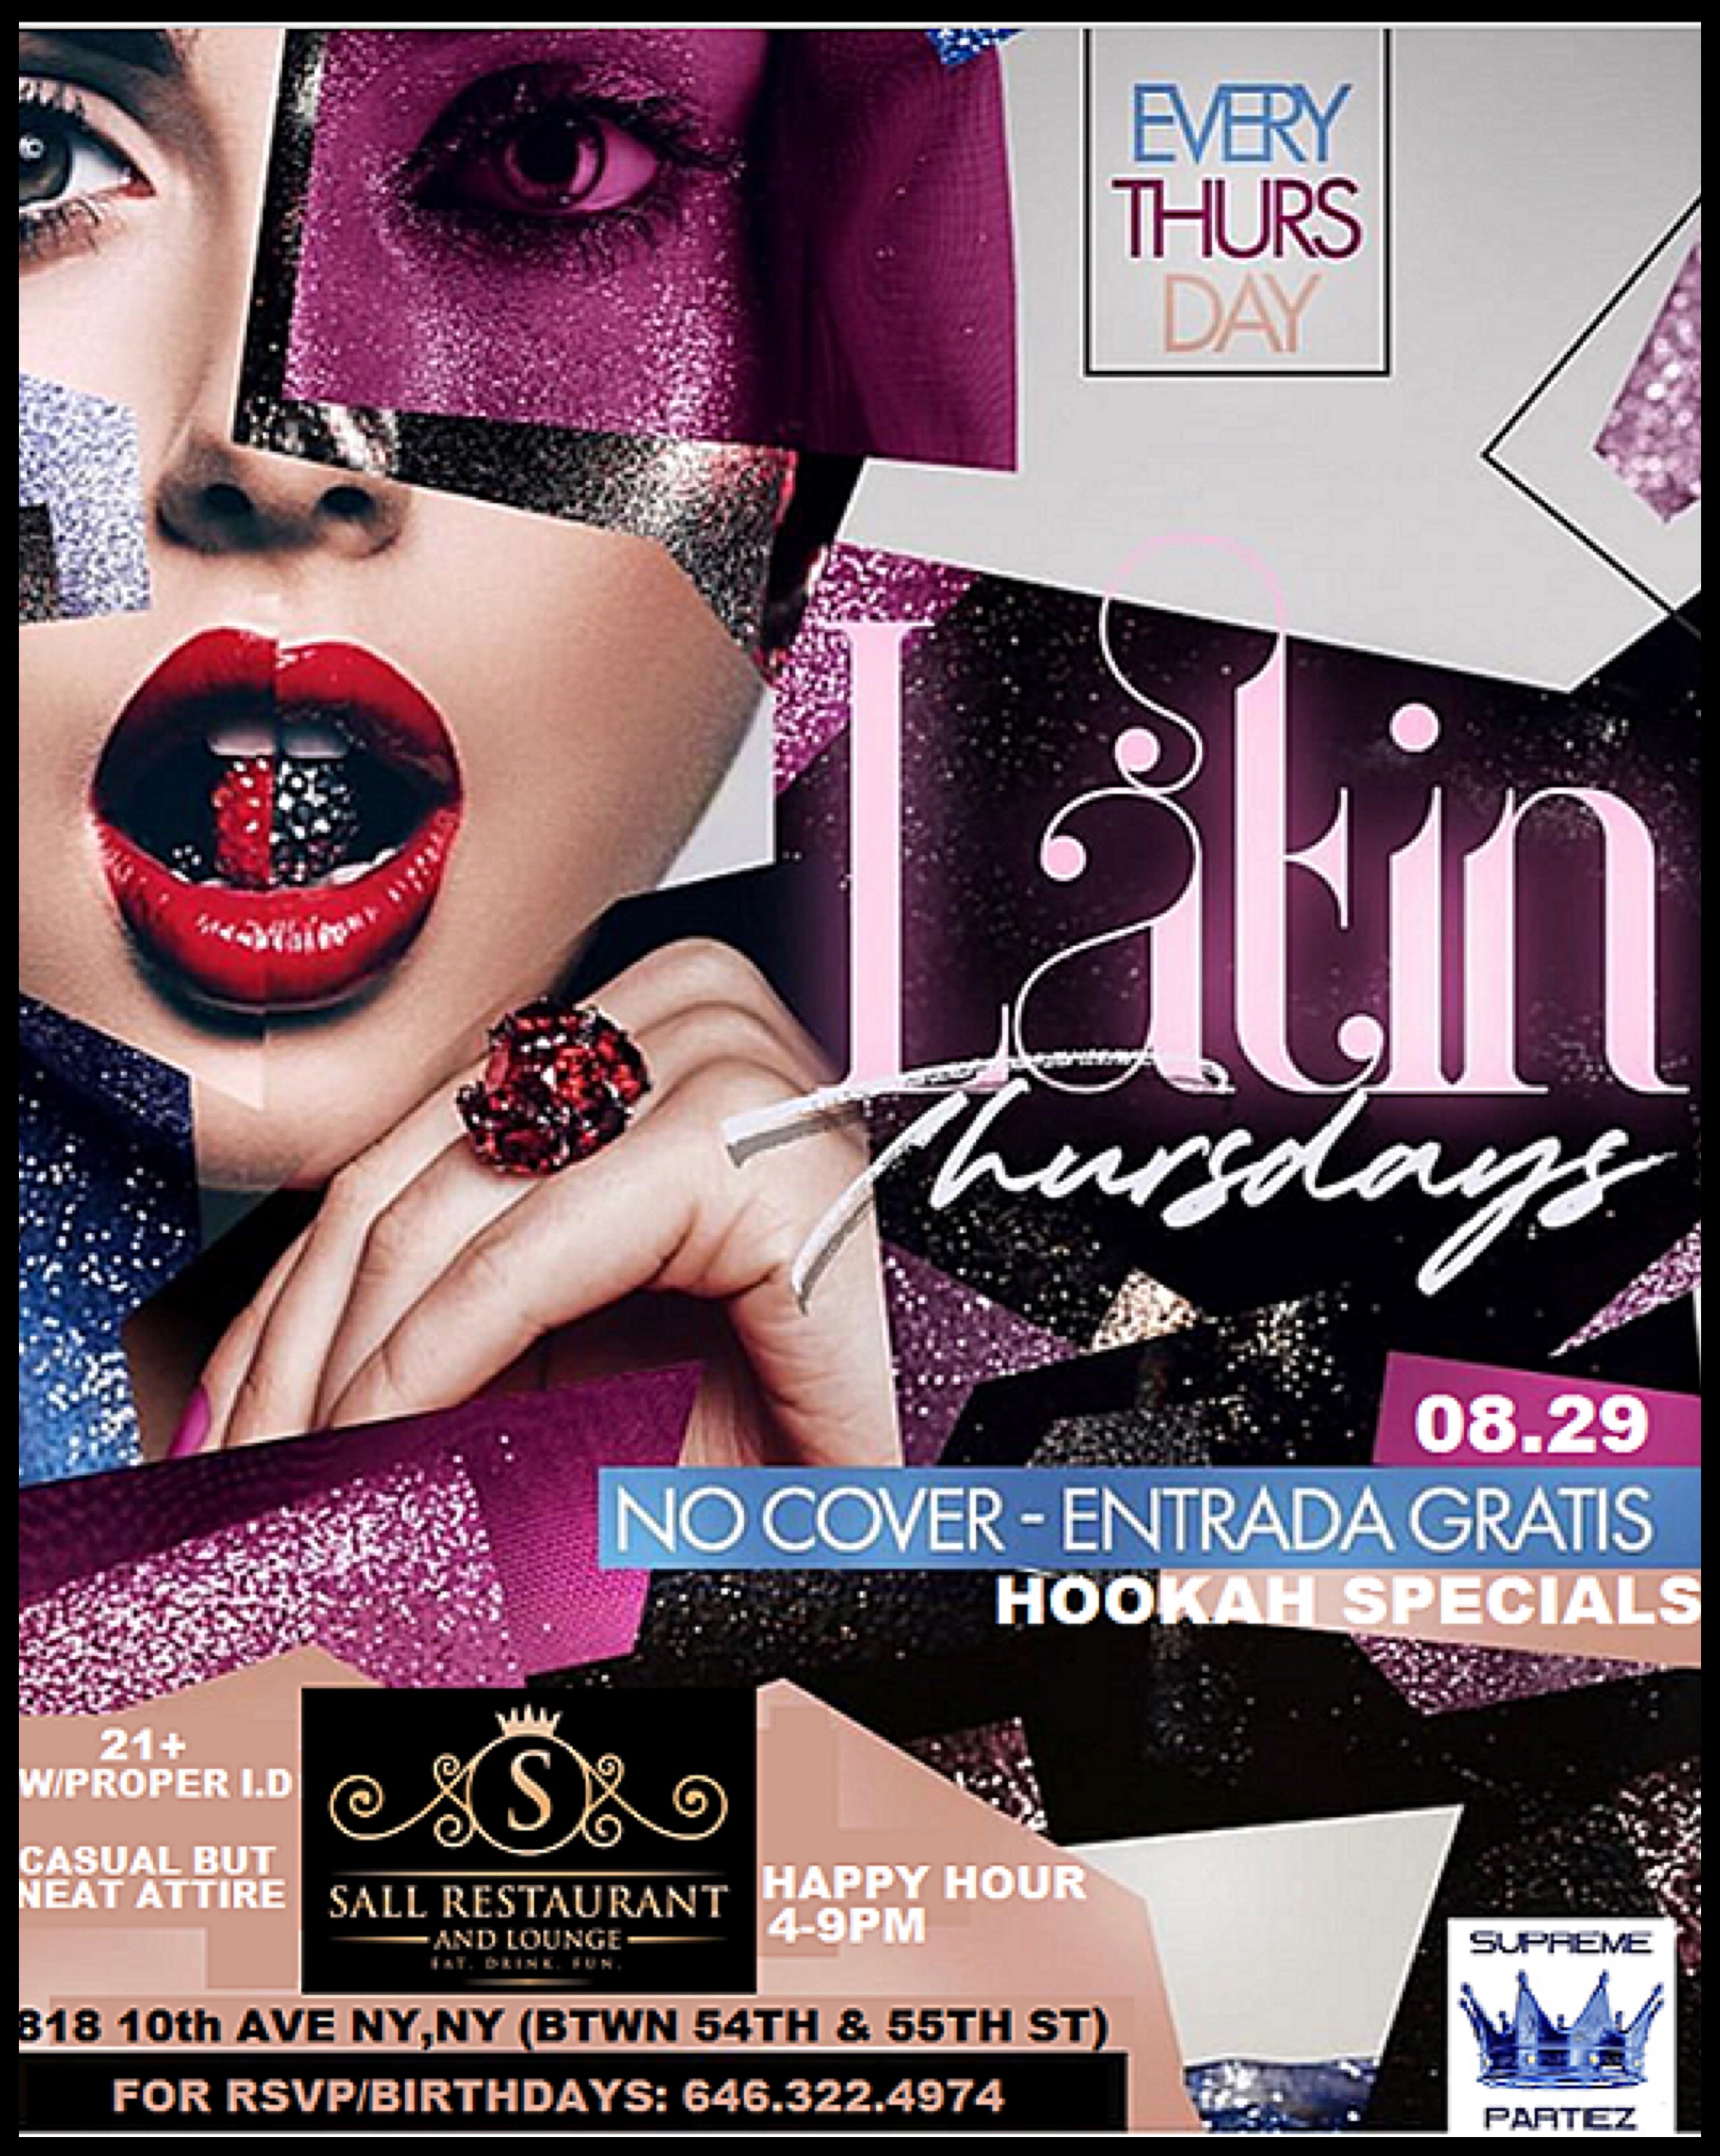 Grand open of latin thursdays afterwork party at sall restaurant and lounge aug 29th, New York, United States